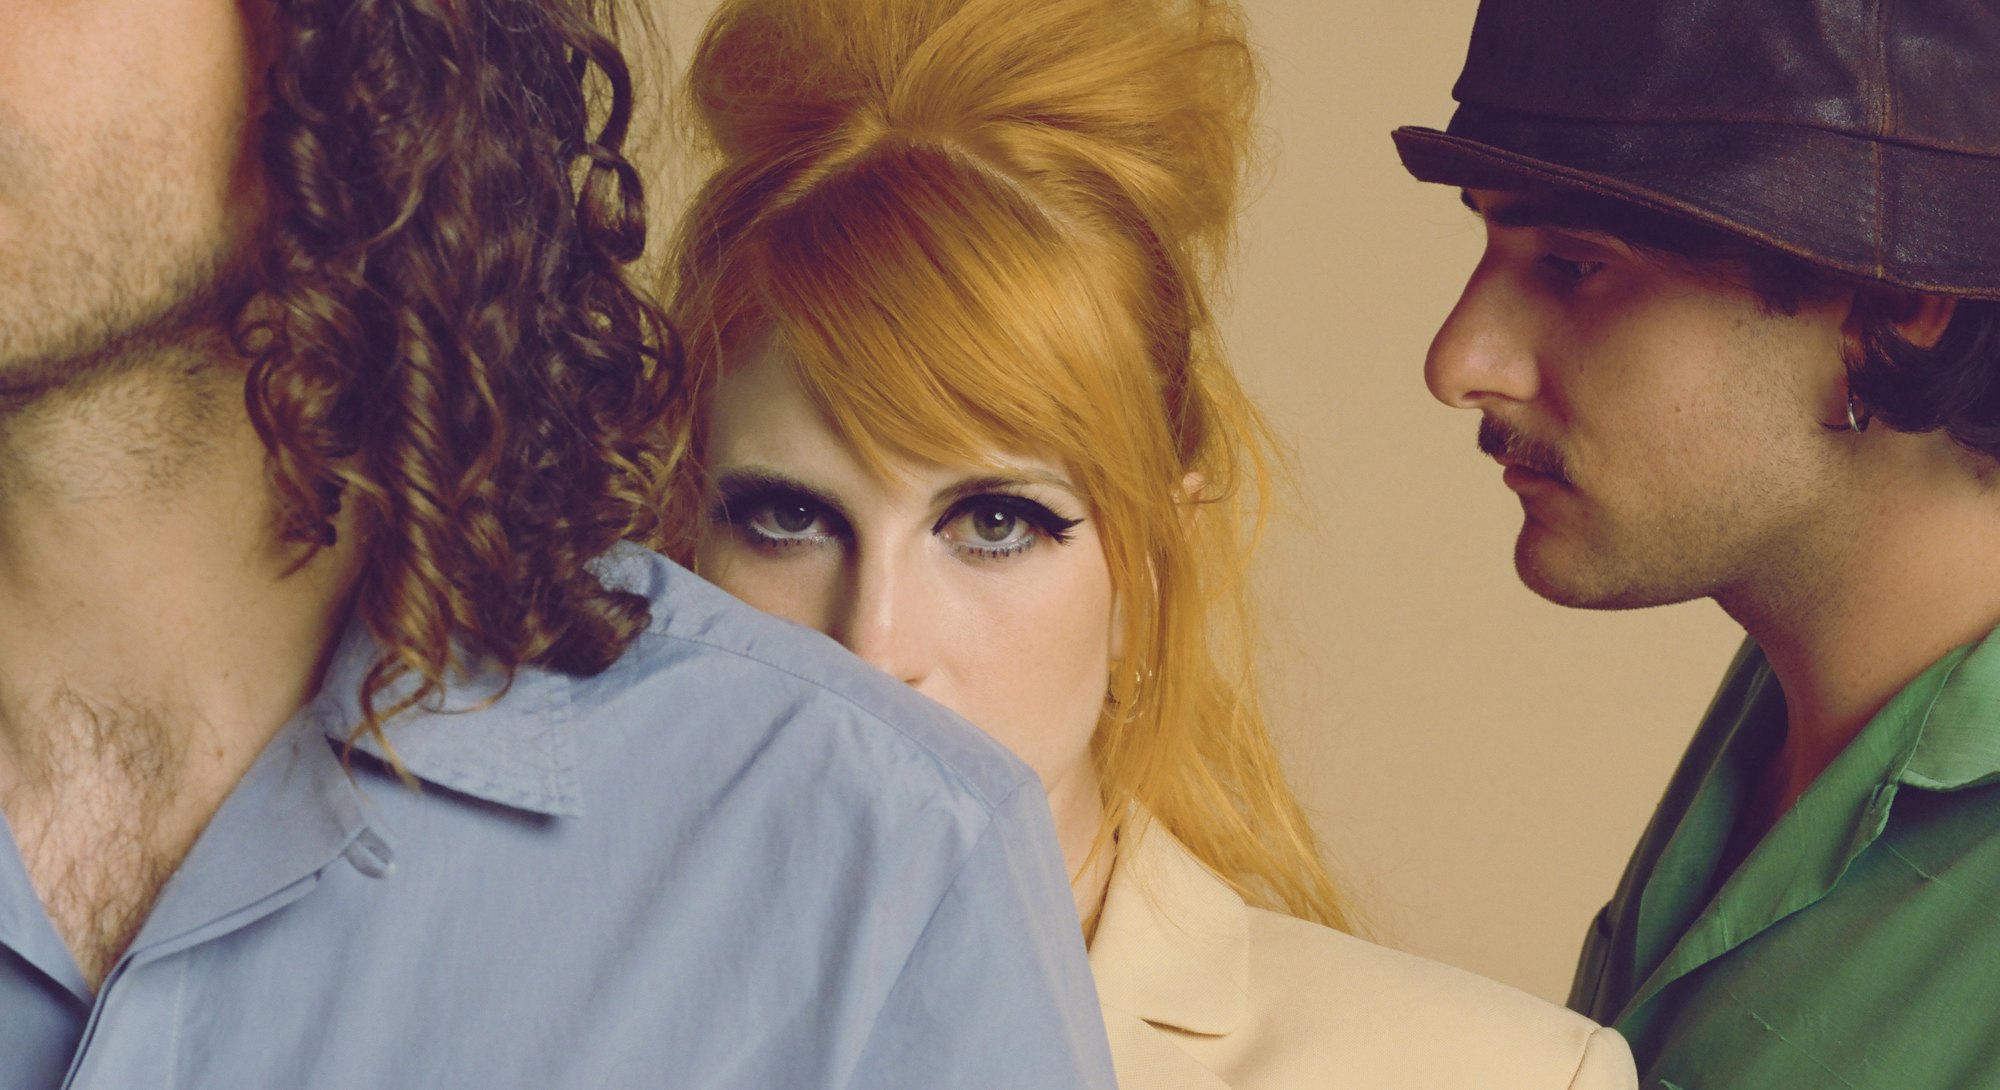 Ginger woman with black eyeliner between two men for the cover of NYLON's soundcheck.